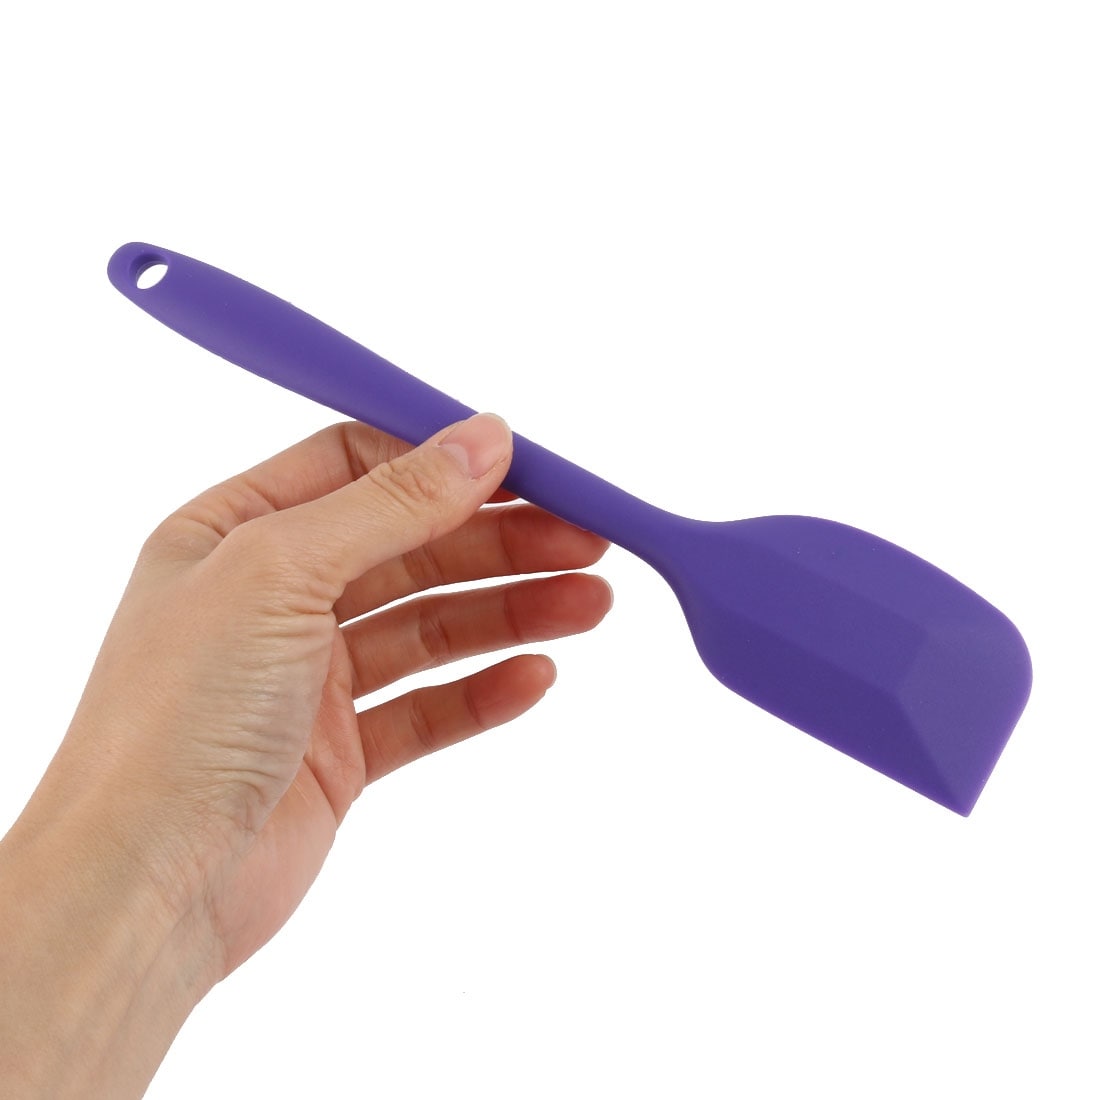 https://ak1.ostkcdn.com/images/products/is/images/direct/a59f153c46b601f48e680d812632eaadefc3f487/Silicone-Bakery-Cake-Cream-Butter-Dessert-Baking-Spatula-Scraper-7pcs.jpg